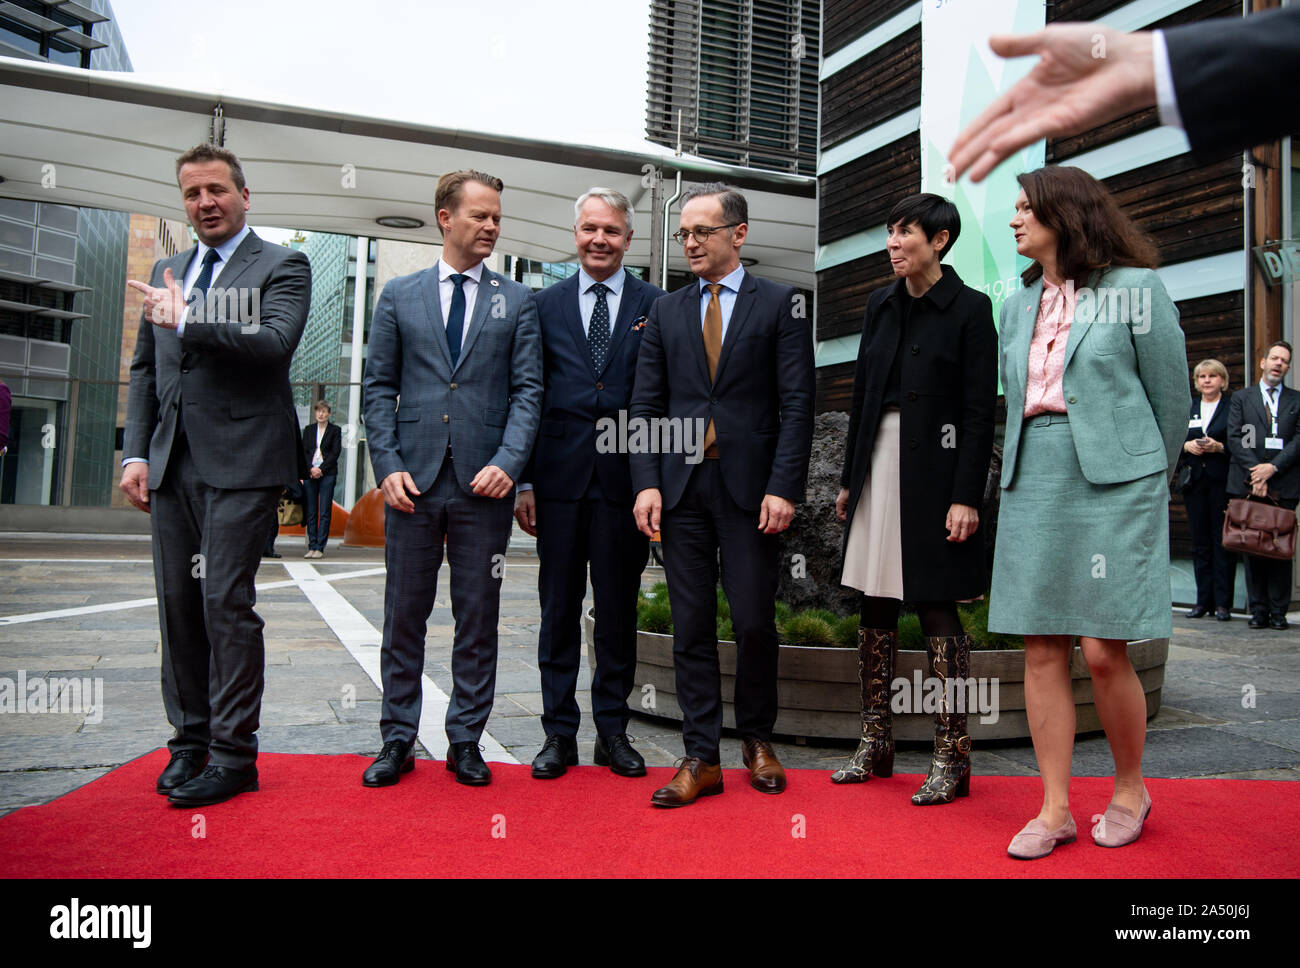 17 October 2019, Berlin: Heiko Maas (4th from left, SPD), Foreign Minister, is welcomed by the Foreign Ministers of the Nordic countries (l-r), Gudlaugur Thor Thordarson (Iceland), Jeppe Kofod (Denmark), Pekka Haavisto (Finland), Ine Marie Eriksen Søreide (Norway) and Ann Linde (Sweden) at the anniversary celebrations of 20 years of Nordic Embassies in Berlin. On 20.10.1999 the common embassy complex of the five Nordic countries was inaugurated in Berlin-Tiergarten. Photo: Bernd von Jutrczenka/dpa Stock Photo